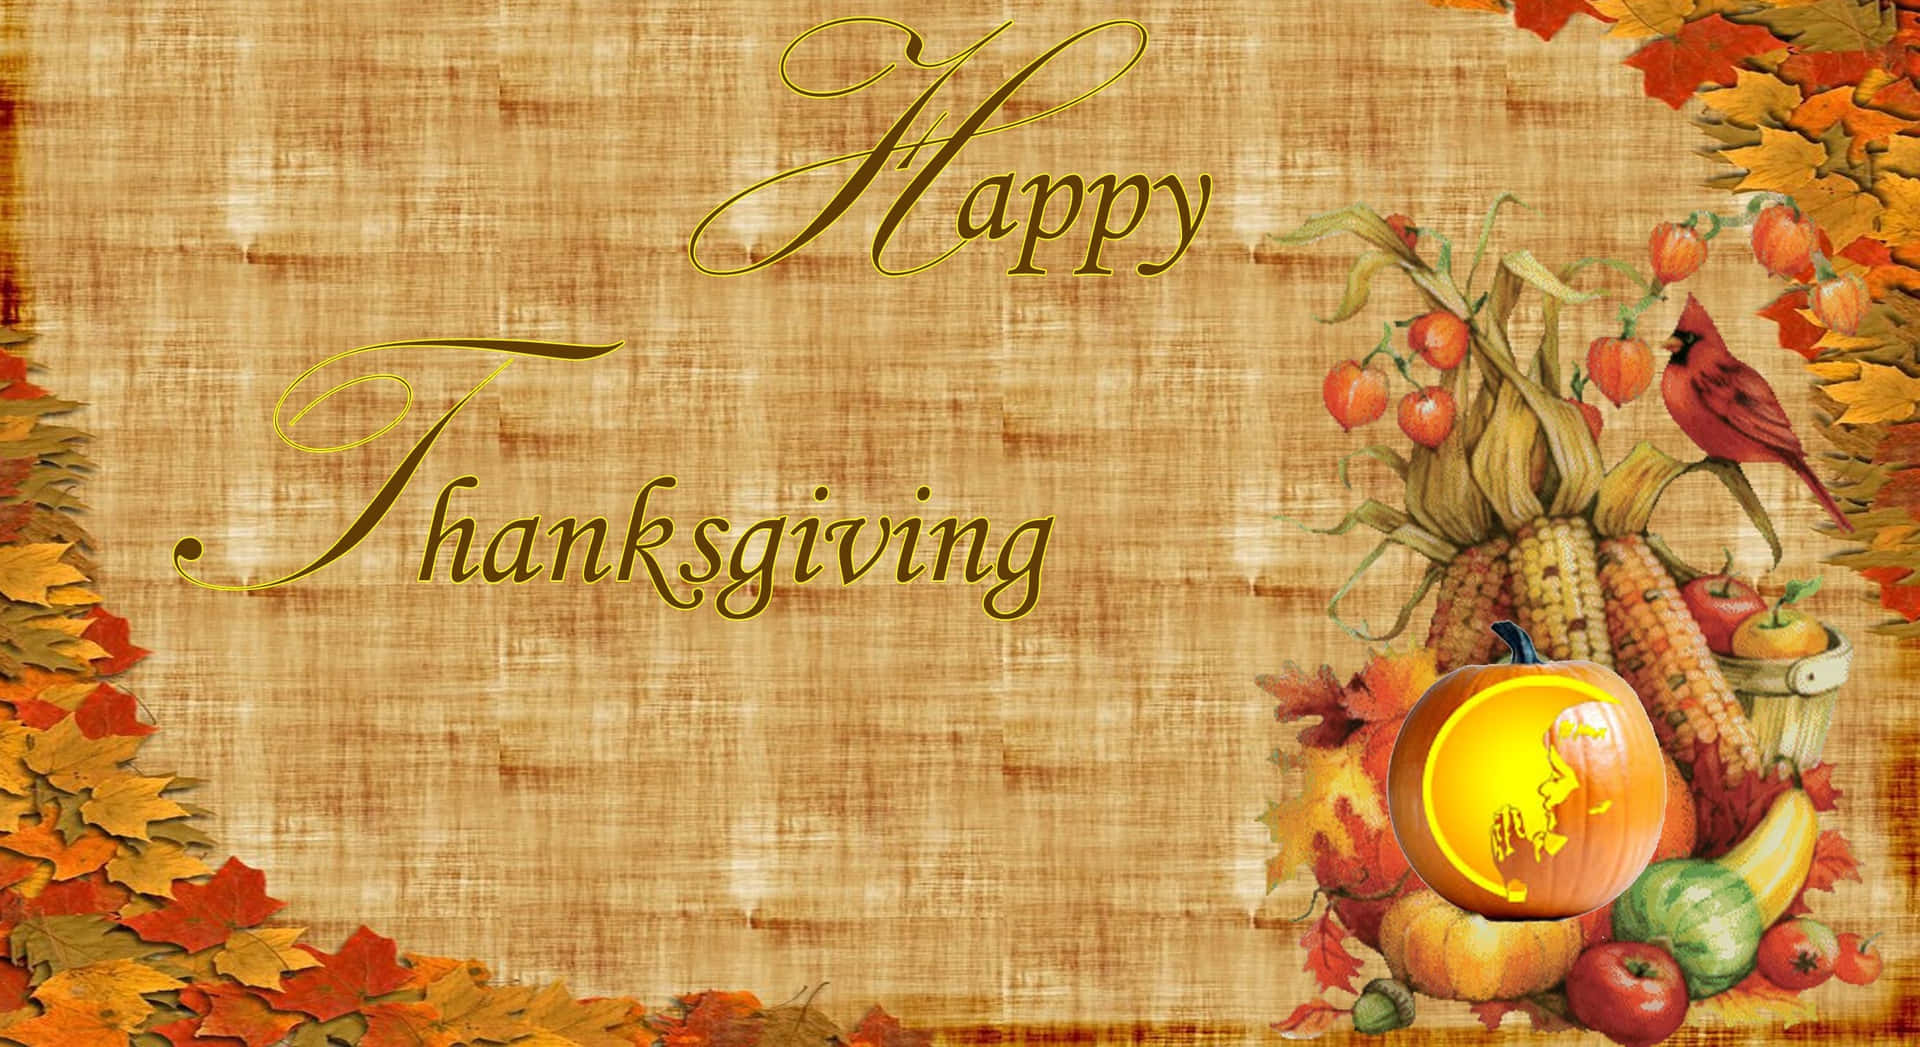 Happy Thanksgiving Greeting On Brown Parchment